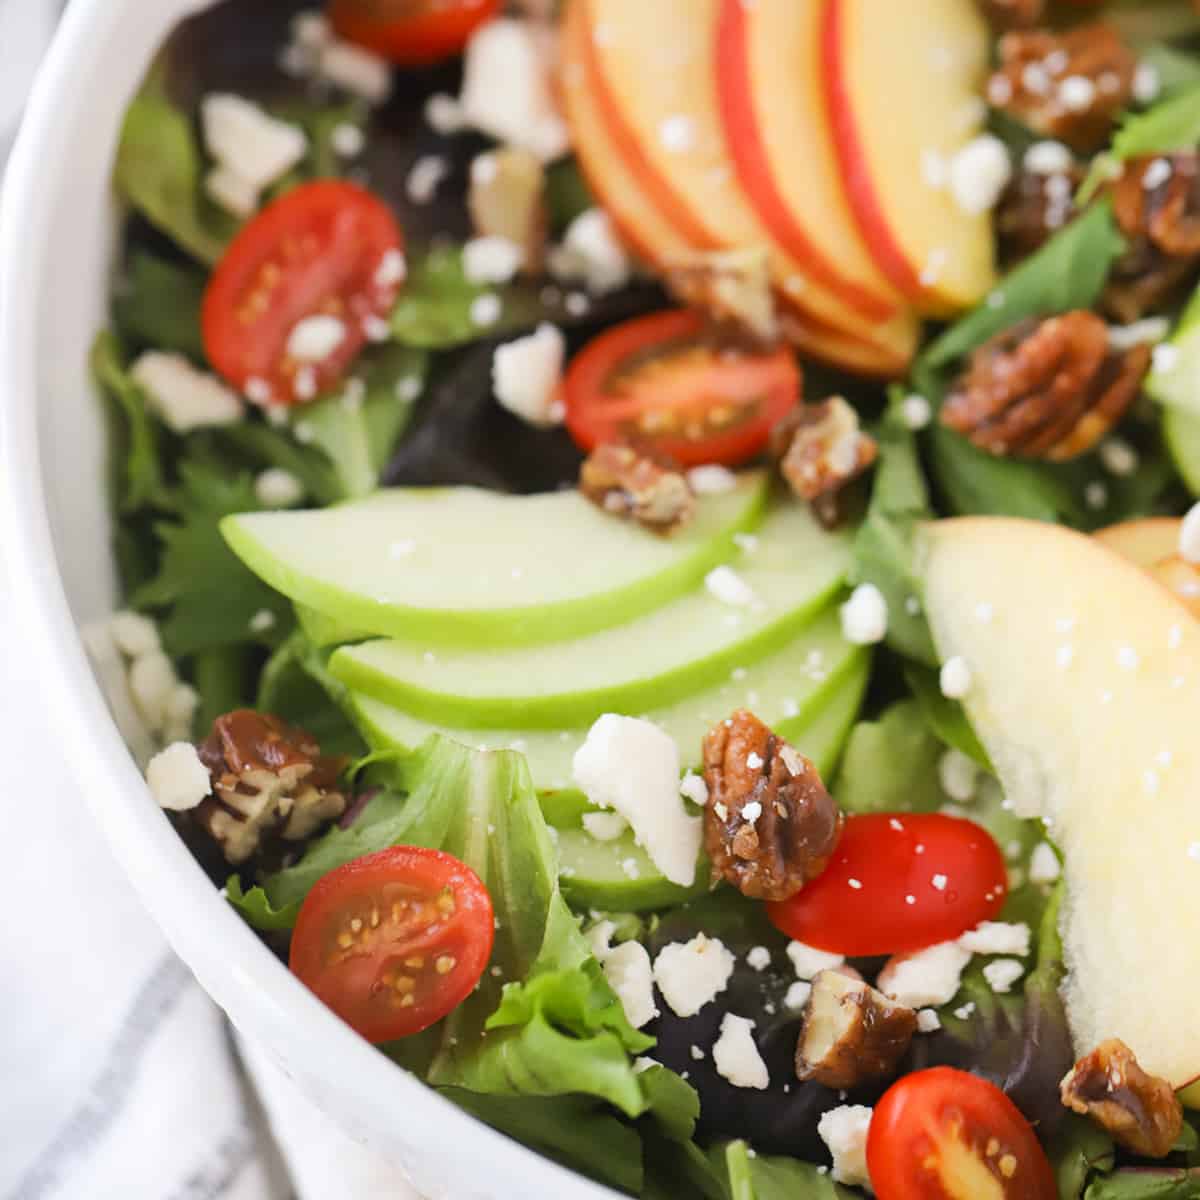 Fall Harvest Salad Recipe - The Carefree Kitchen